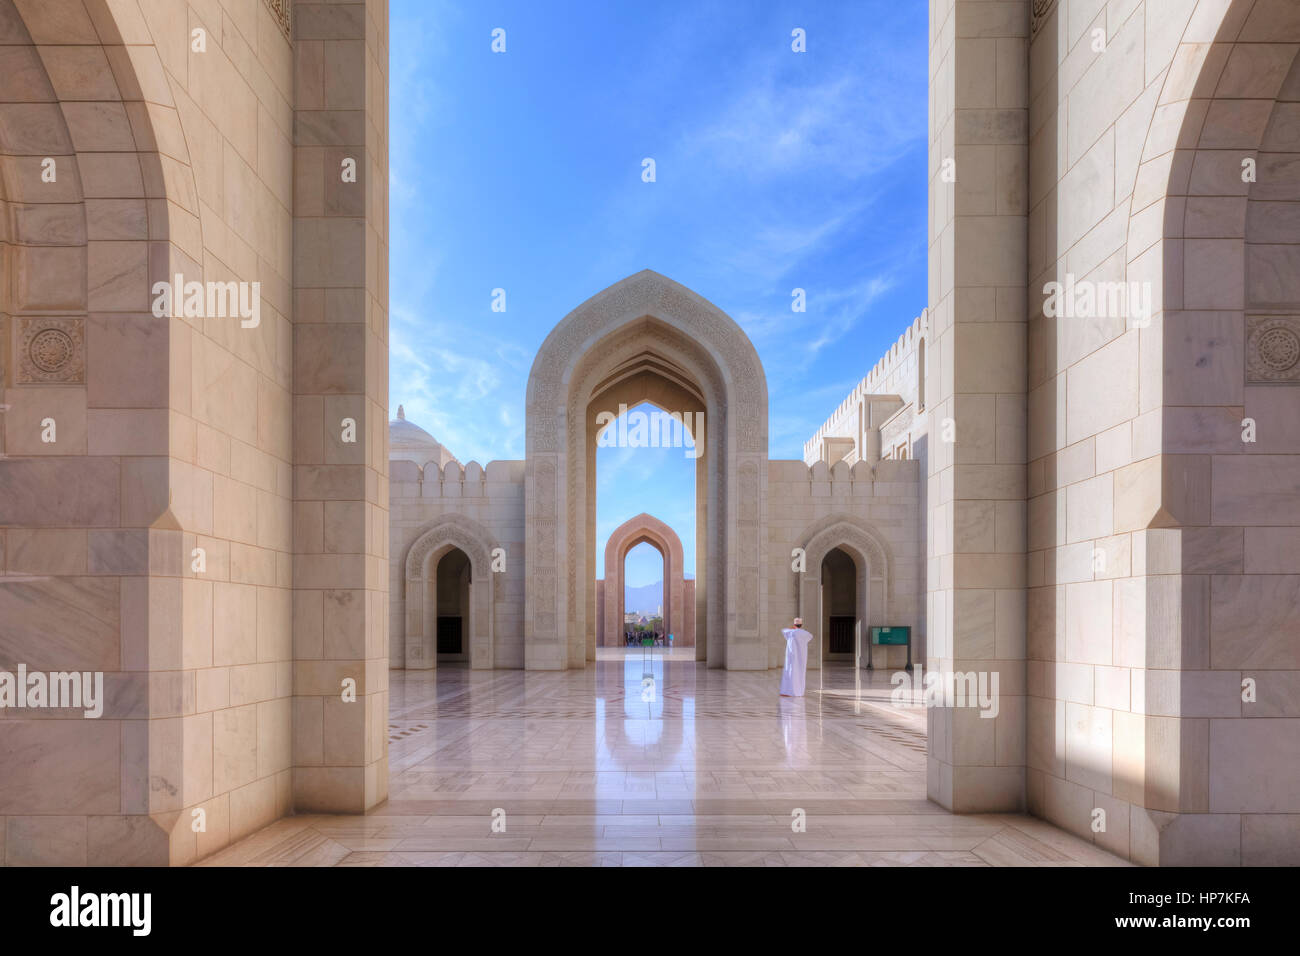 Sultan Qaboos Grand Mosque, Muscat, Oman, Middle East, Asia Stock Photo